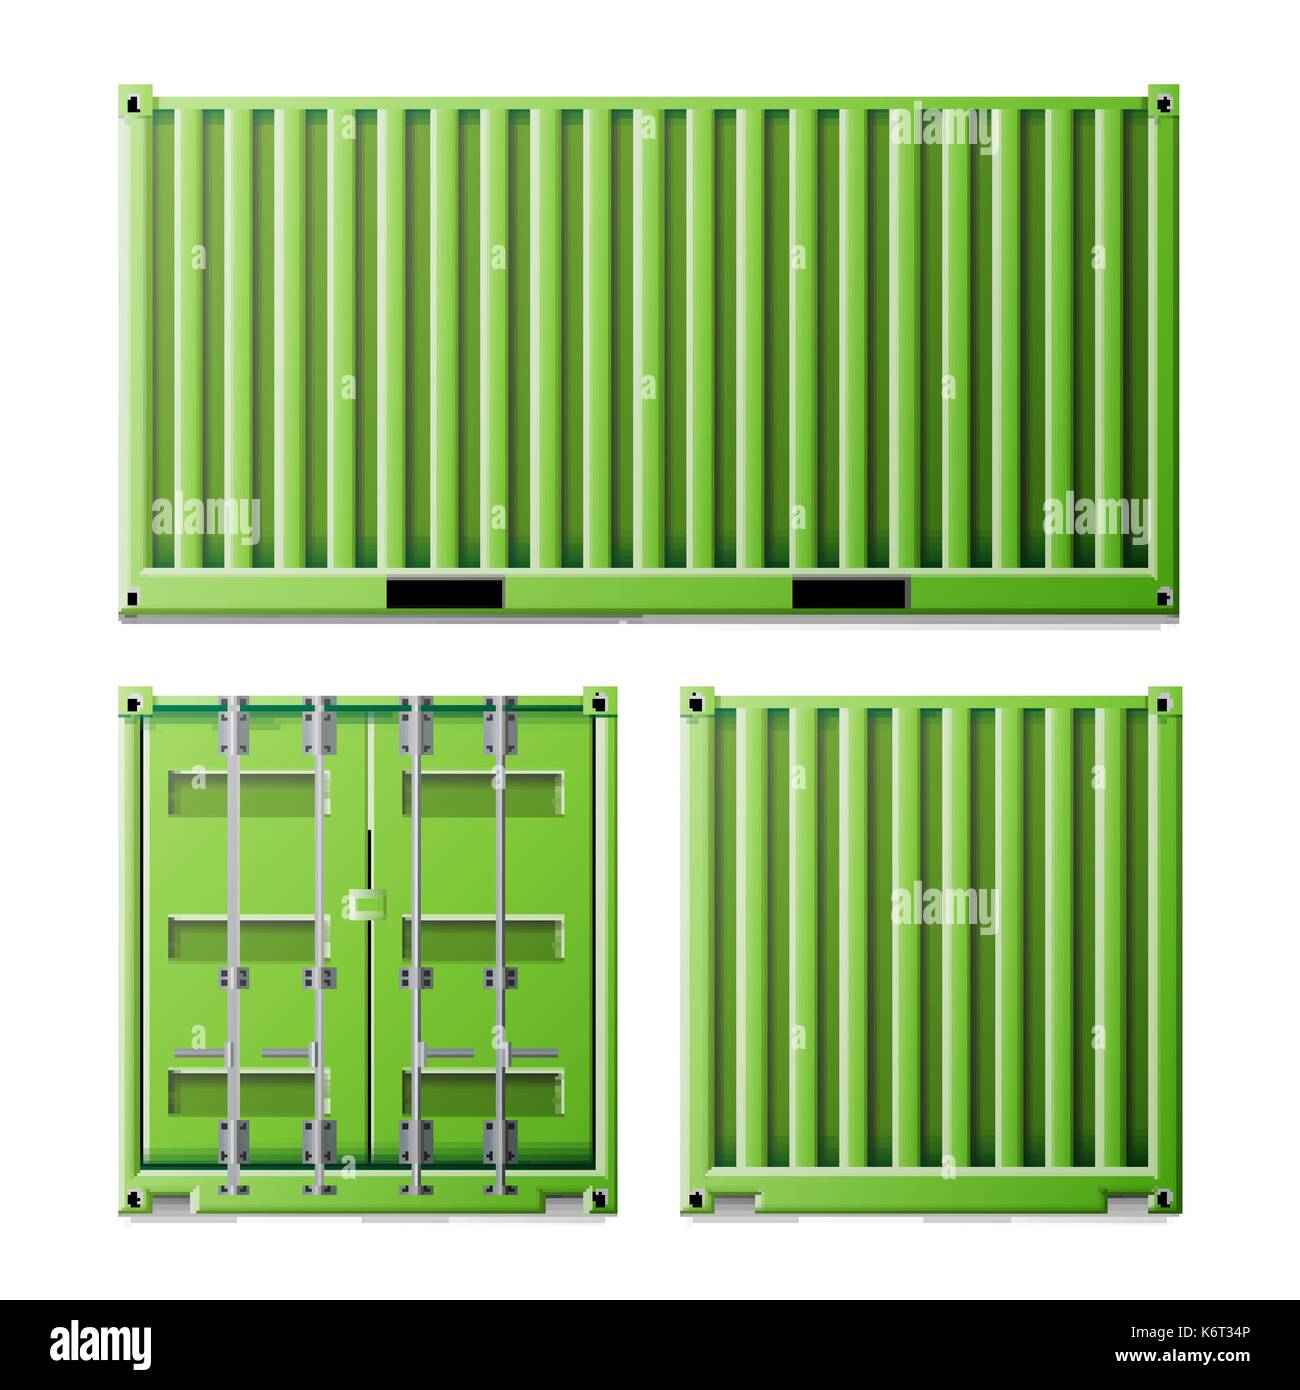 Green Cargo Container Vector. Freight Shipping Container Concept. Logistics, Transportation Mock Up. Front And Back Sides. Isolated On White Background Illustration Stock Vector